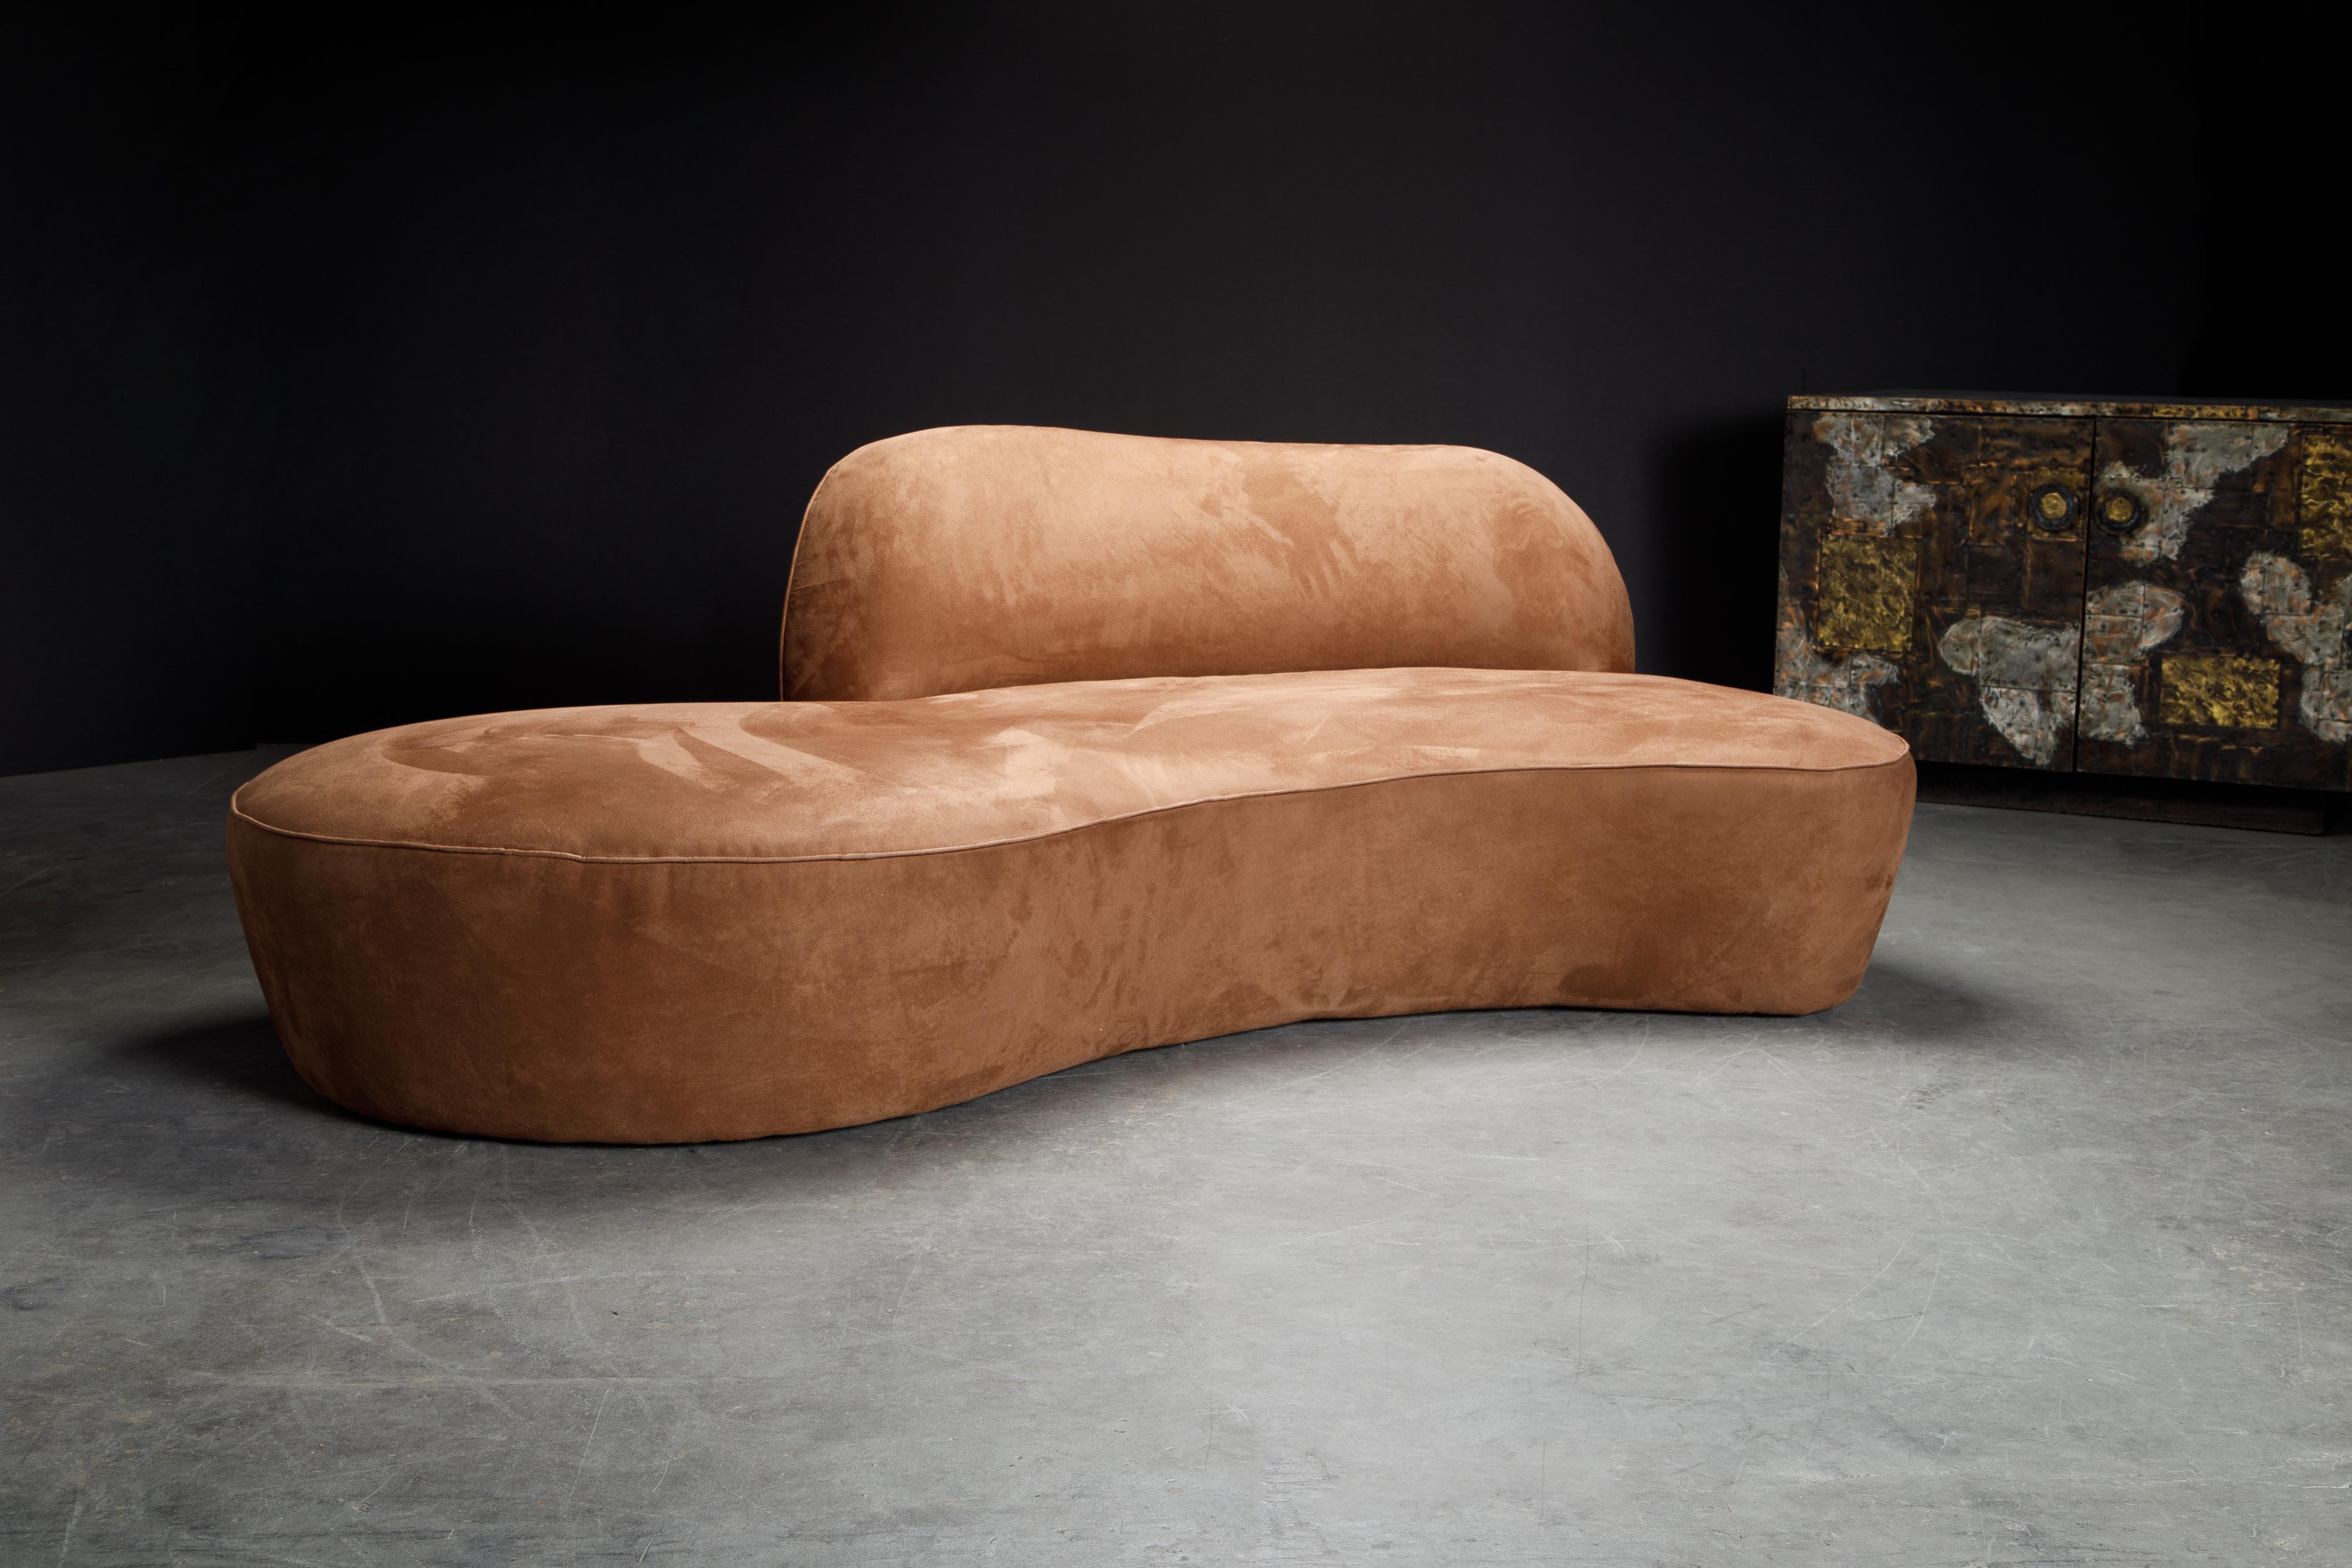 This spectacular example of Vladimir Kagan design was produced by American Leather for a short time during the early to mid 2000's, in its original brown Alcantara Ultrasuede, signed underneath with original American Leather label. Modeled after the